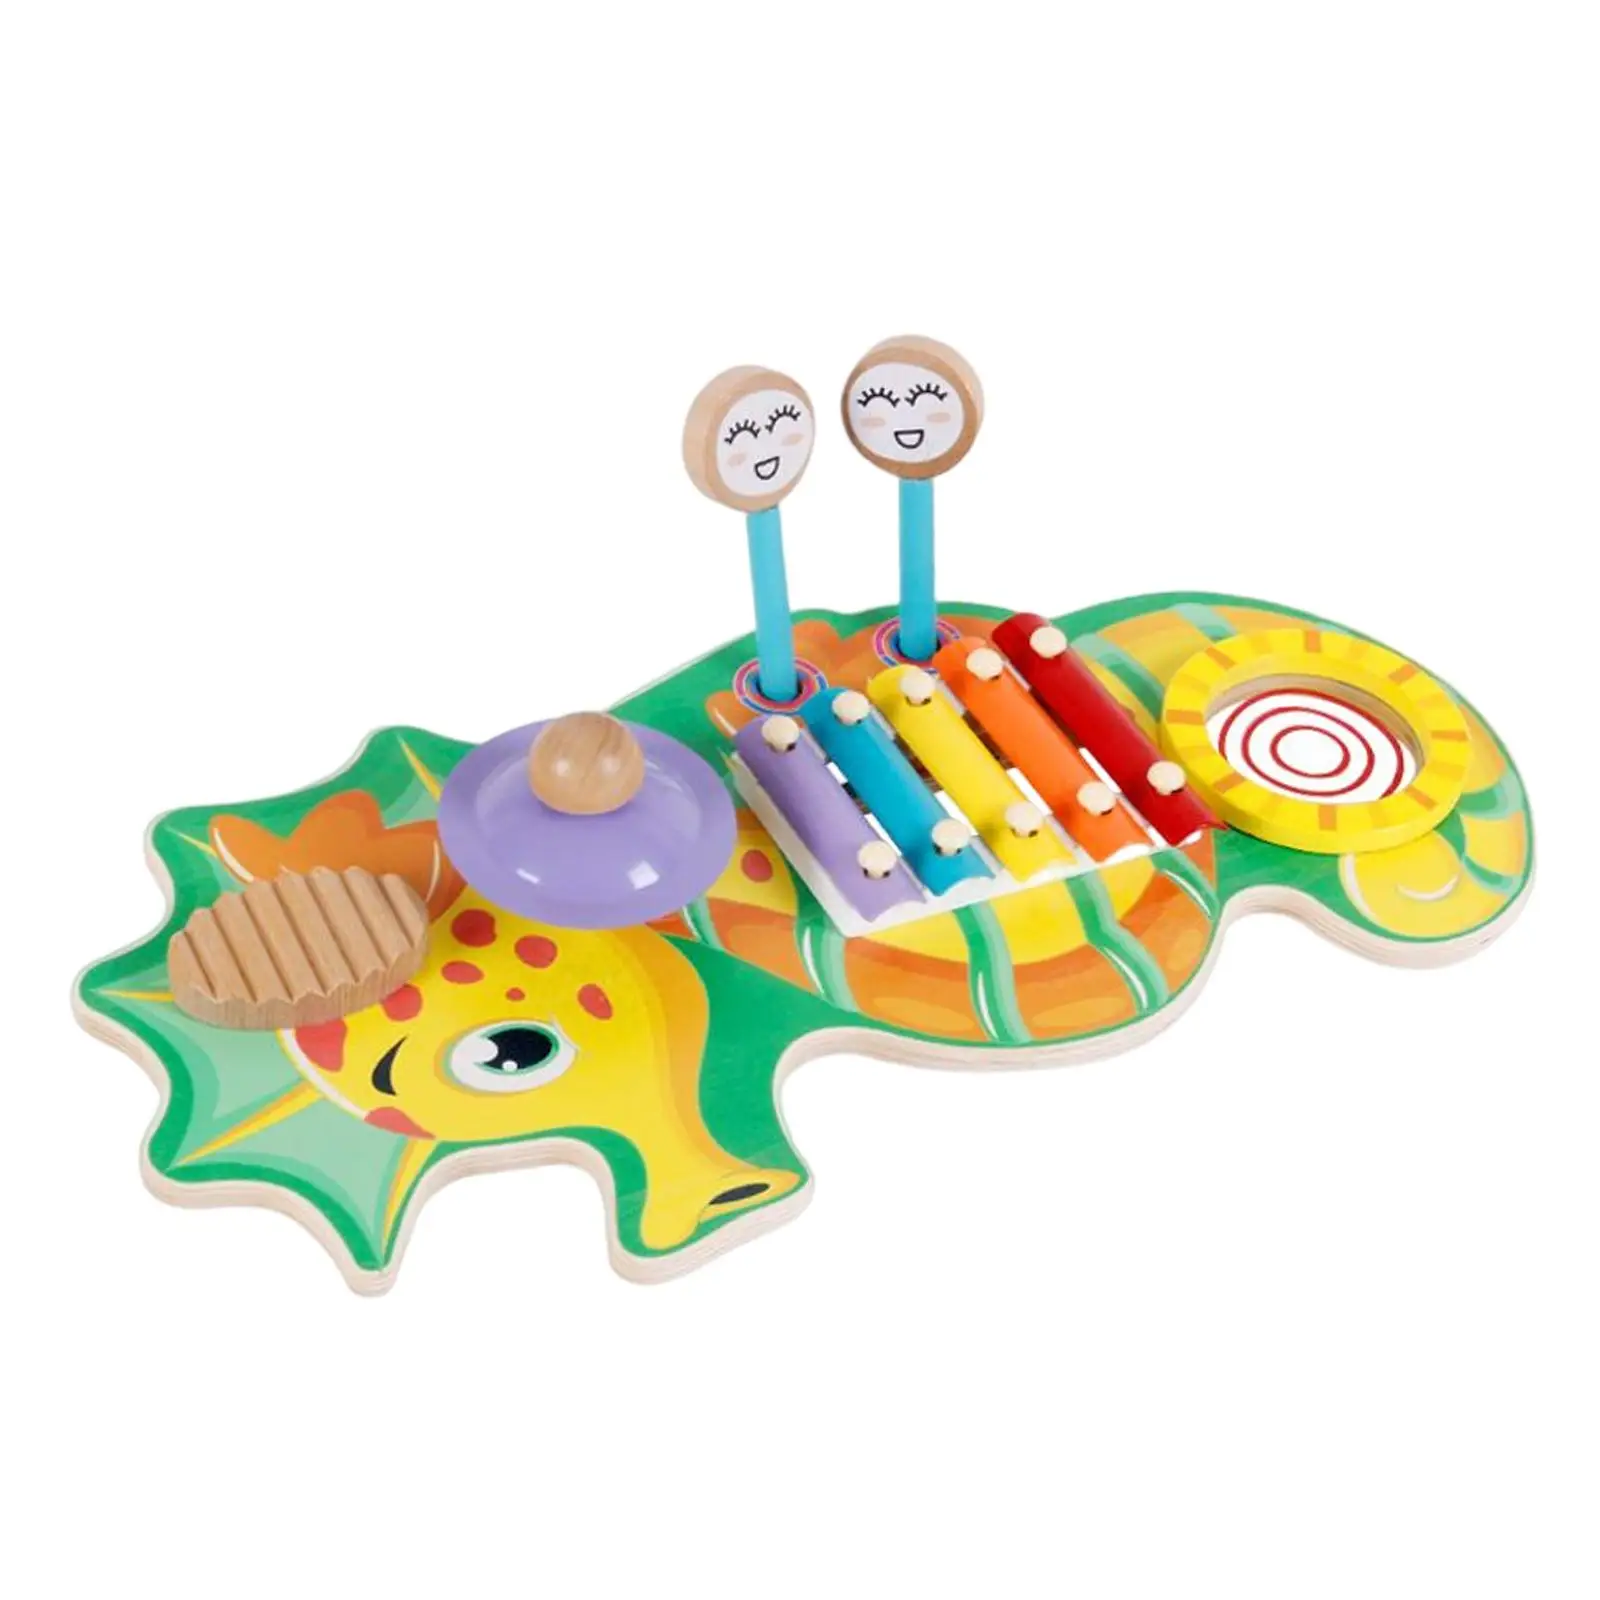 Percussion Instrument Toy Fine Motor Skills Sensory Toy for Bedroom Toddler